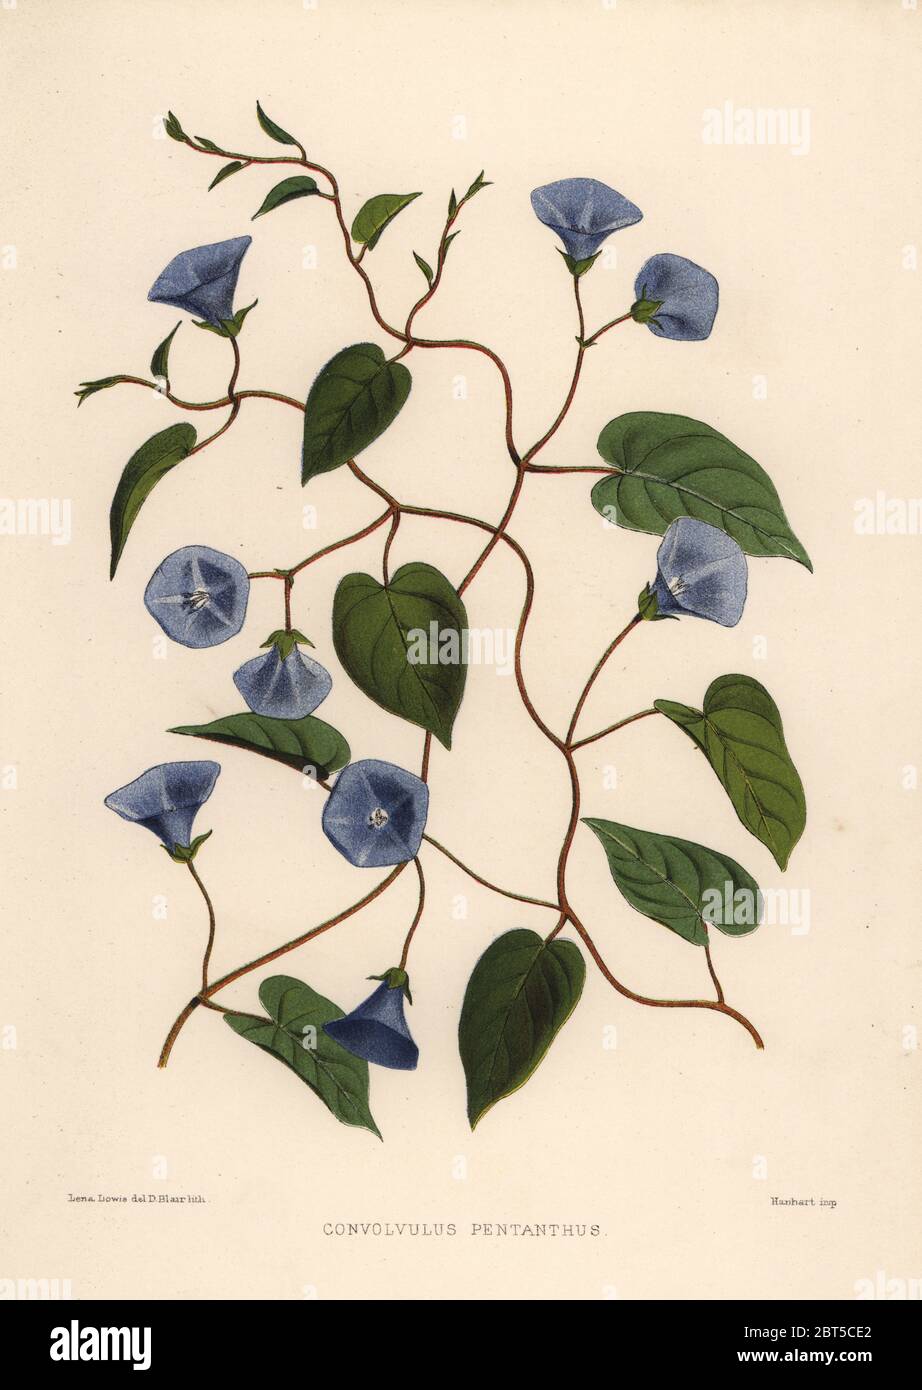 Clustervine, Jacquemontia pentanthos (Convolvulus pentanthus). Handcoloured lithograph by D. Blair after an illustration by Lena Lowis from her Familiar Indian Flowers with Coloured Plates, L. Reeve, London, 1878. Lena Lowis, formerly Selena Caroline Shakespear (1845-1919), was a British woman artist who traveled to India with her husband Lt.-Col. Ninian Lowis. Stock Photo